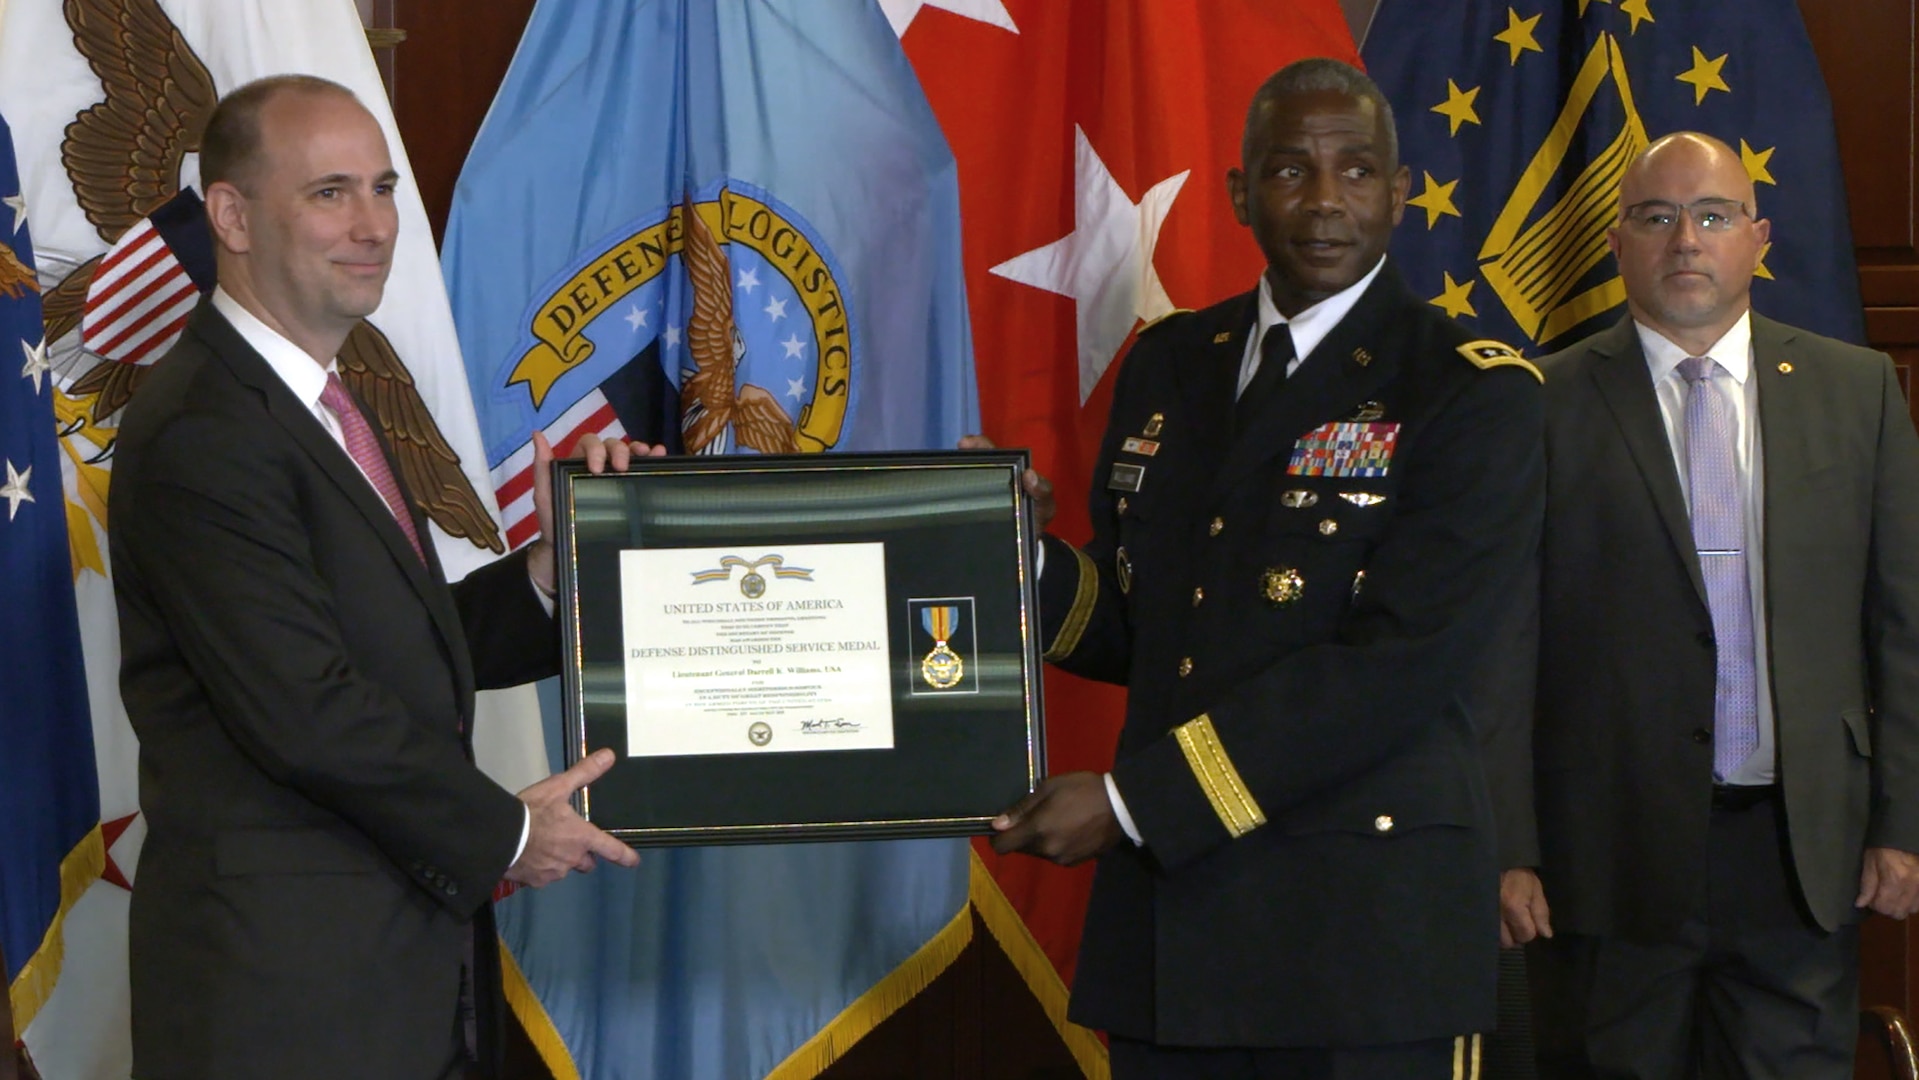 White man in suit and black man in Army dress uniform hold a framed certificate and medal in front of U.S. and DLA flags